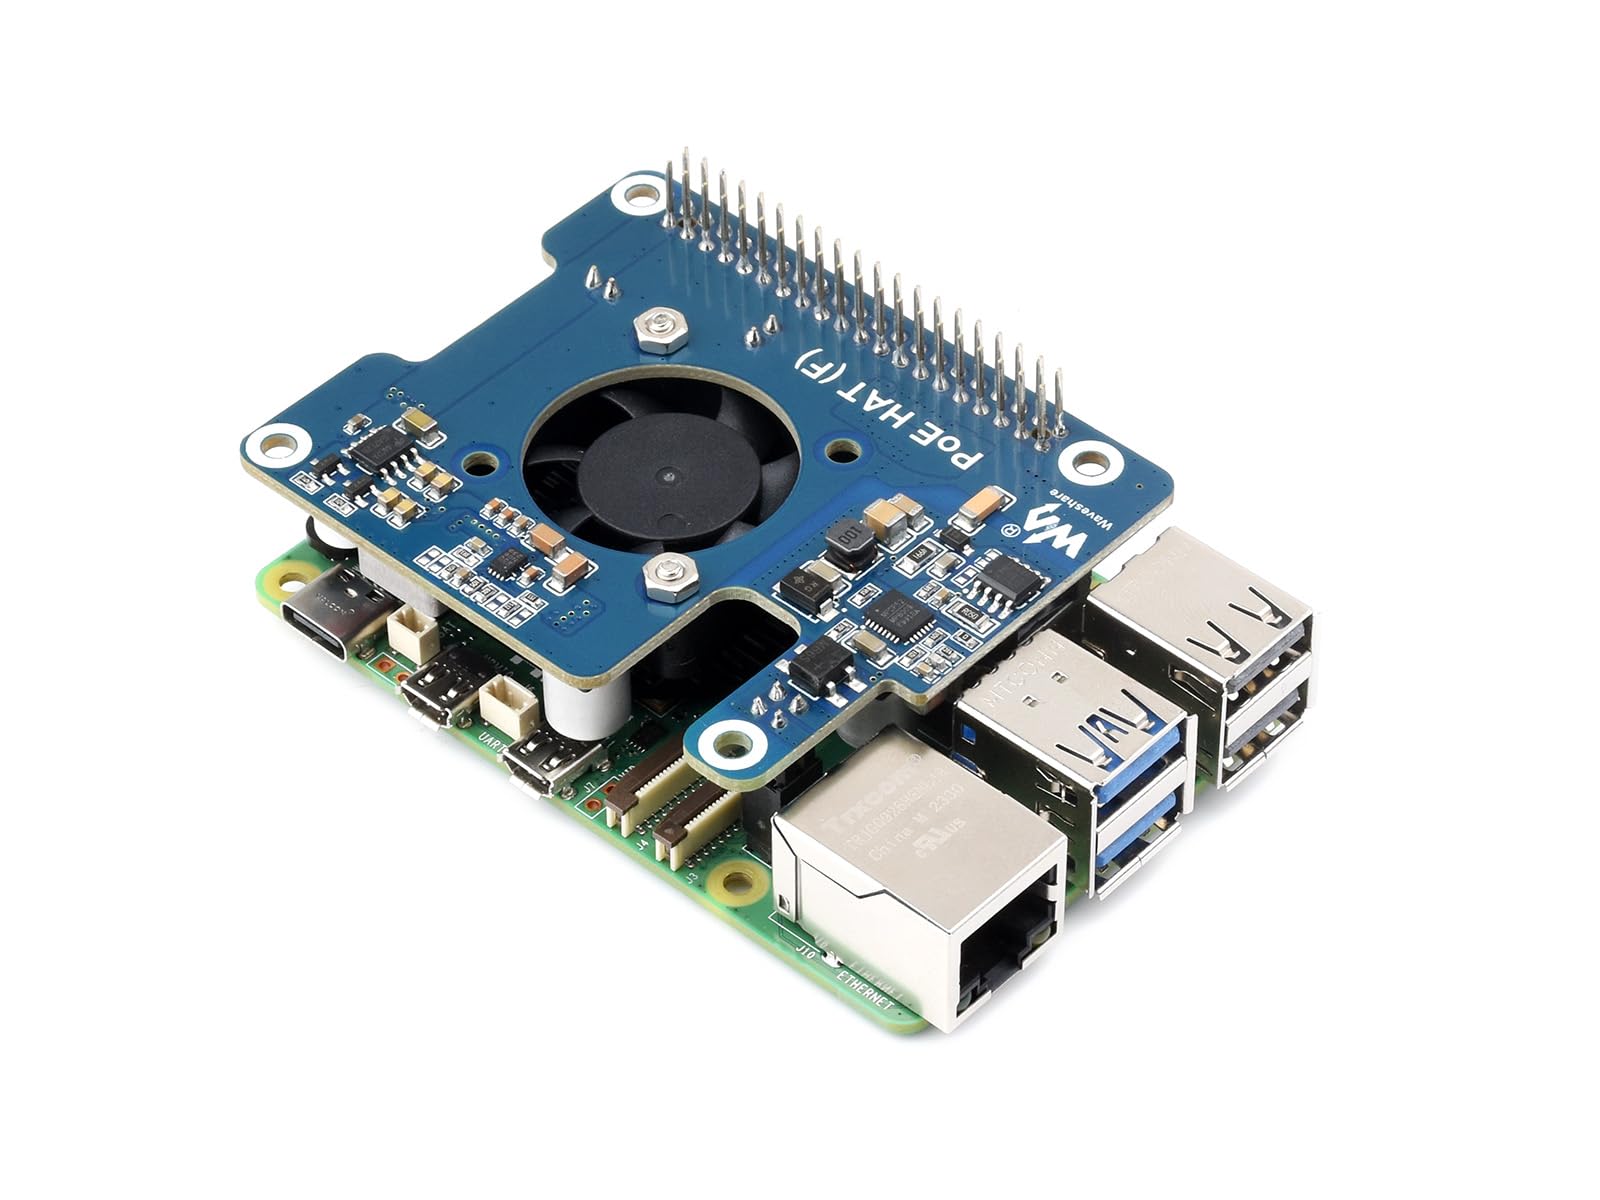 waveshare Power Over Ethernet HAT PoE HAT with Metal Heatsink for Raspberry Pi 5, Onboard Cooling Fan, Supports 802.3af/at Network, 12V and 5V Power Outputs Easy for More Peripherals